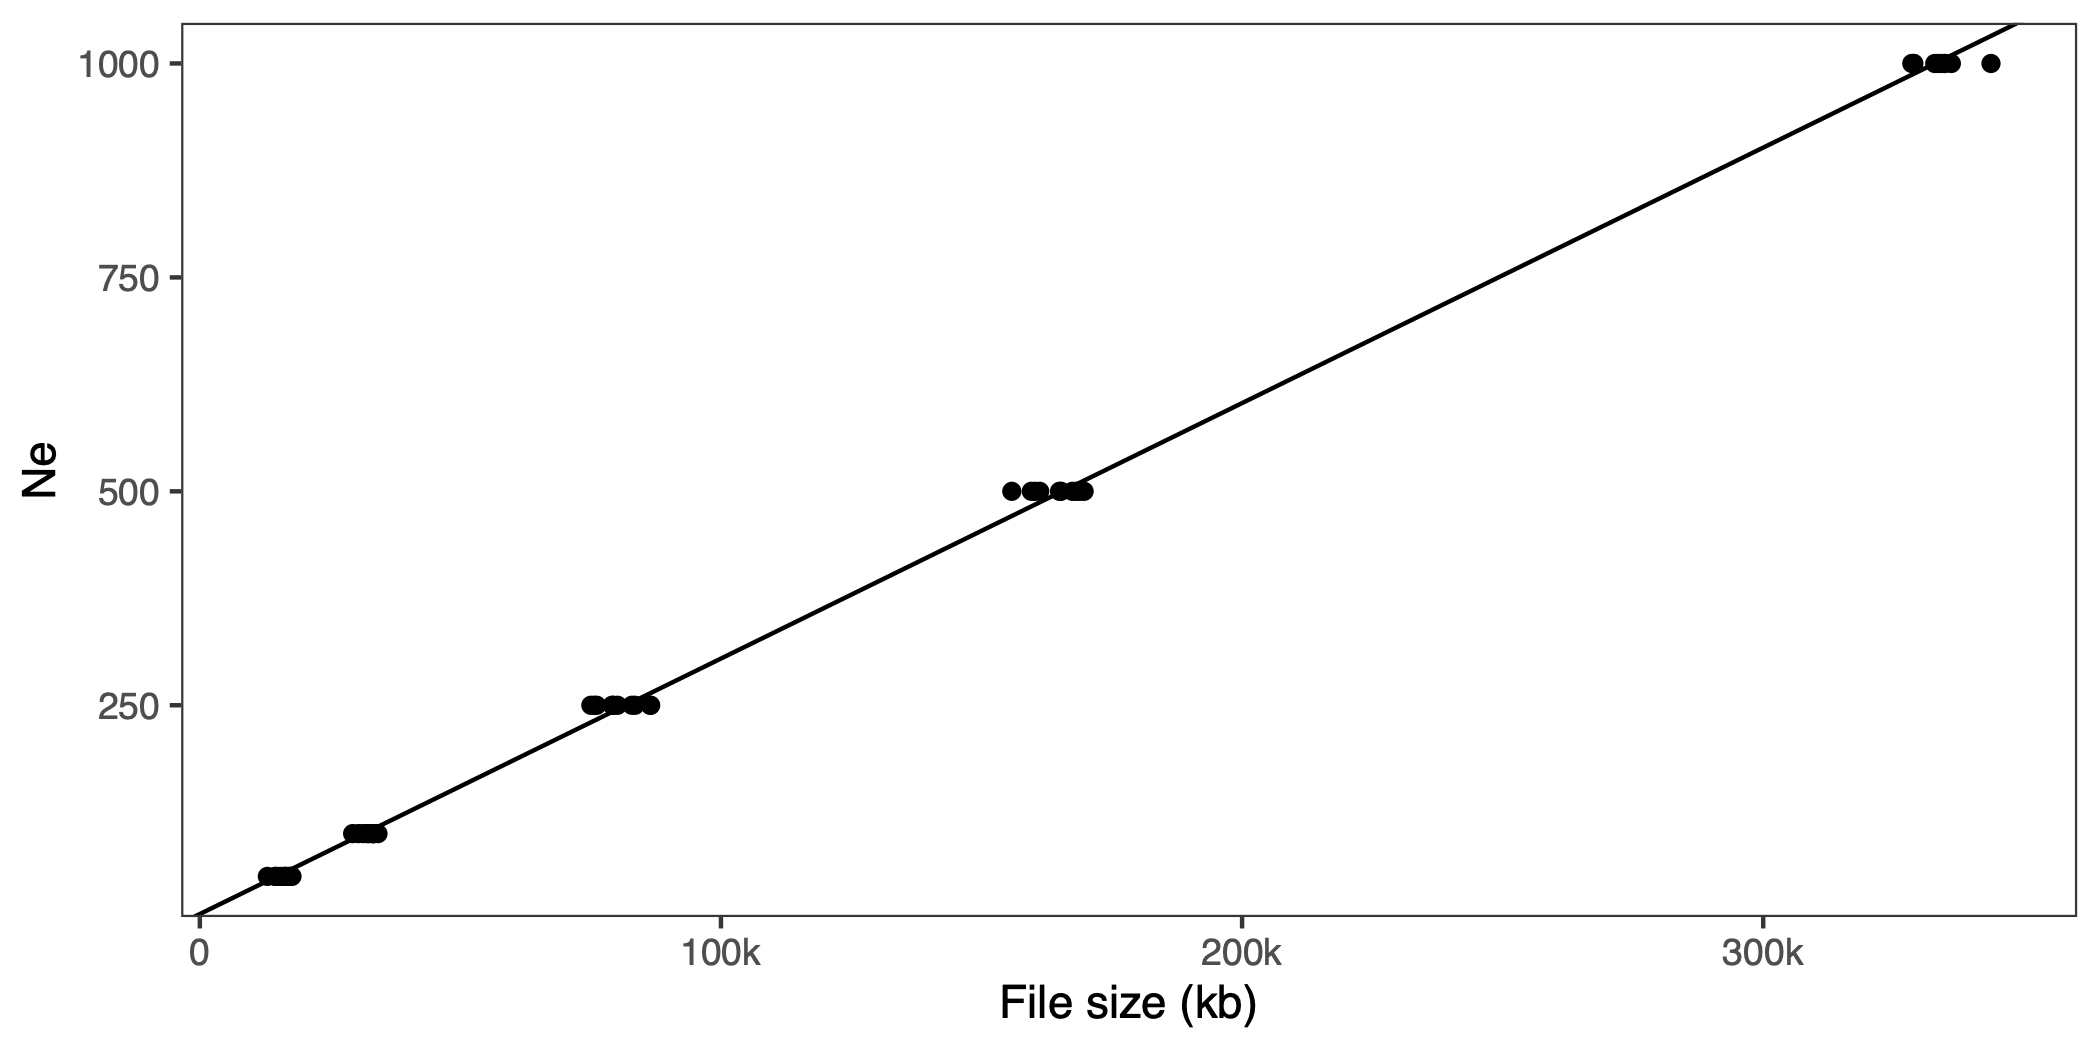 A scatterplot of simulated output file size against effective population size.